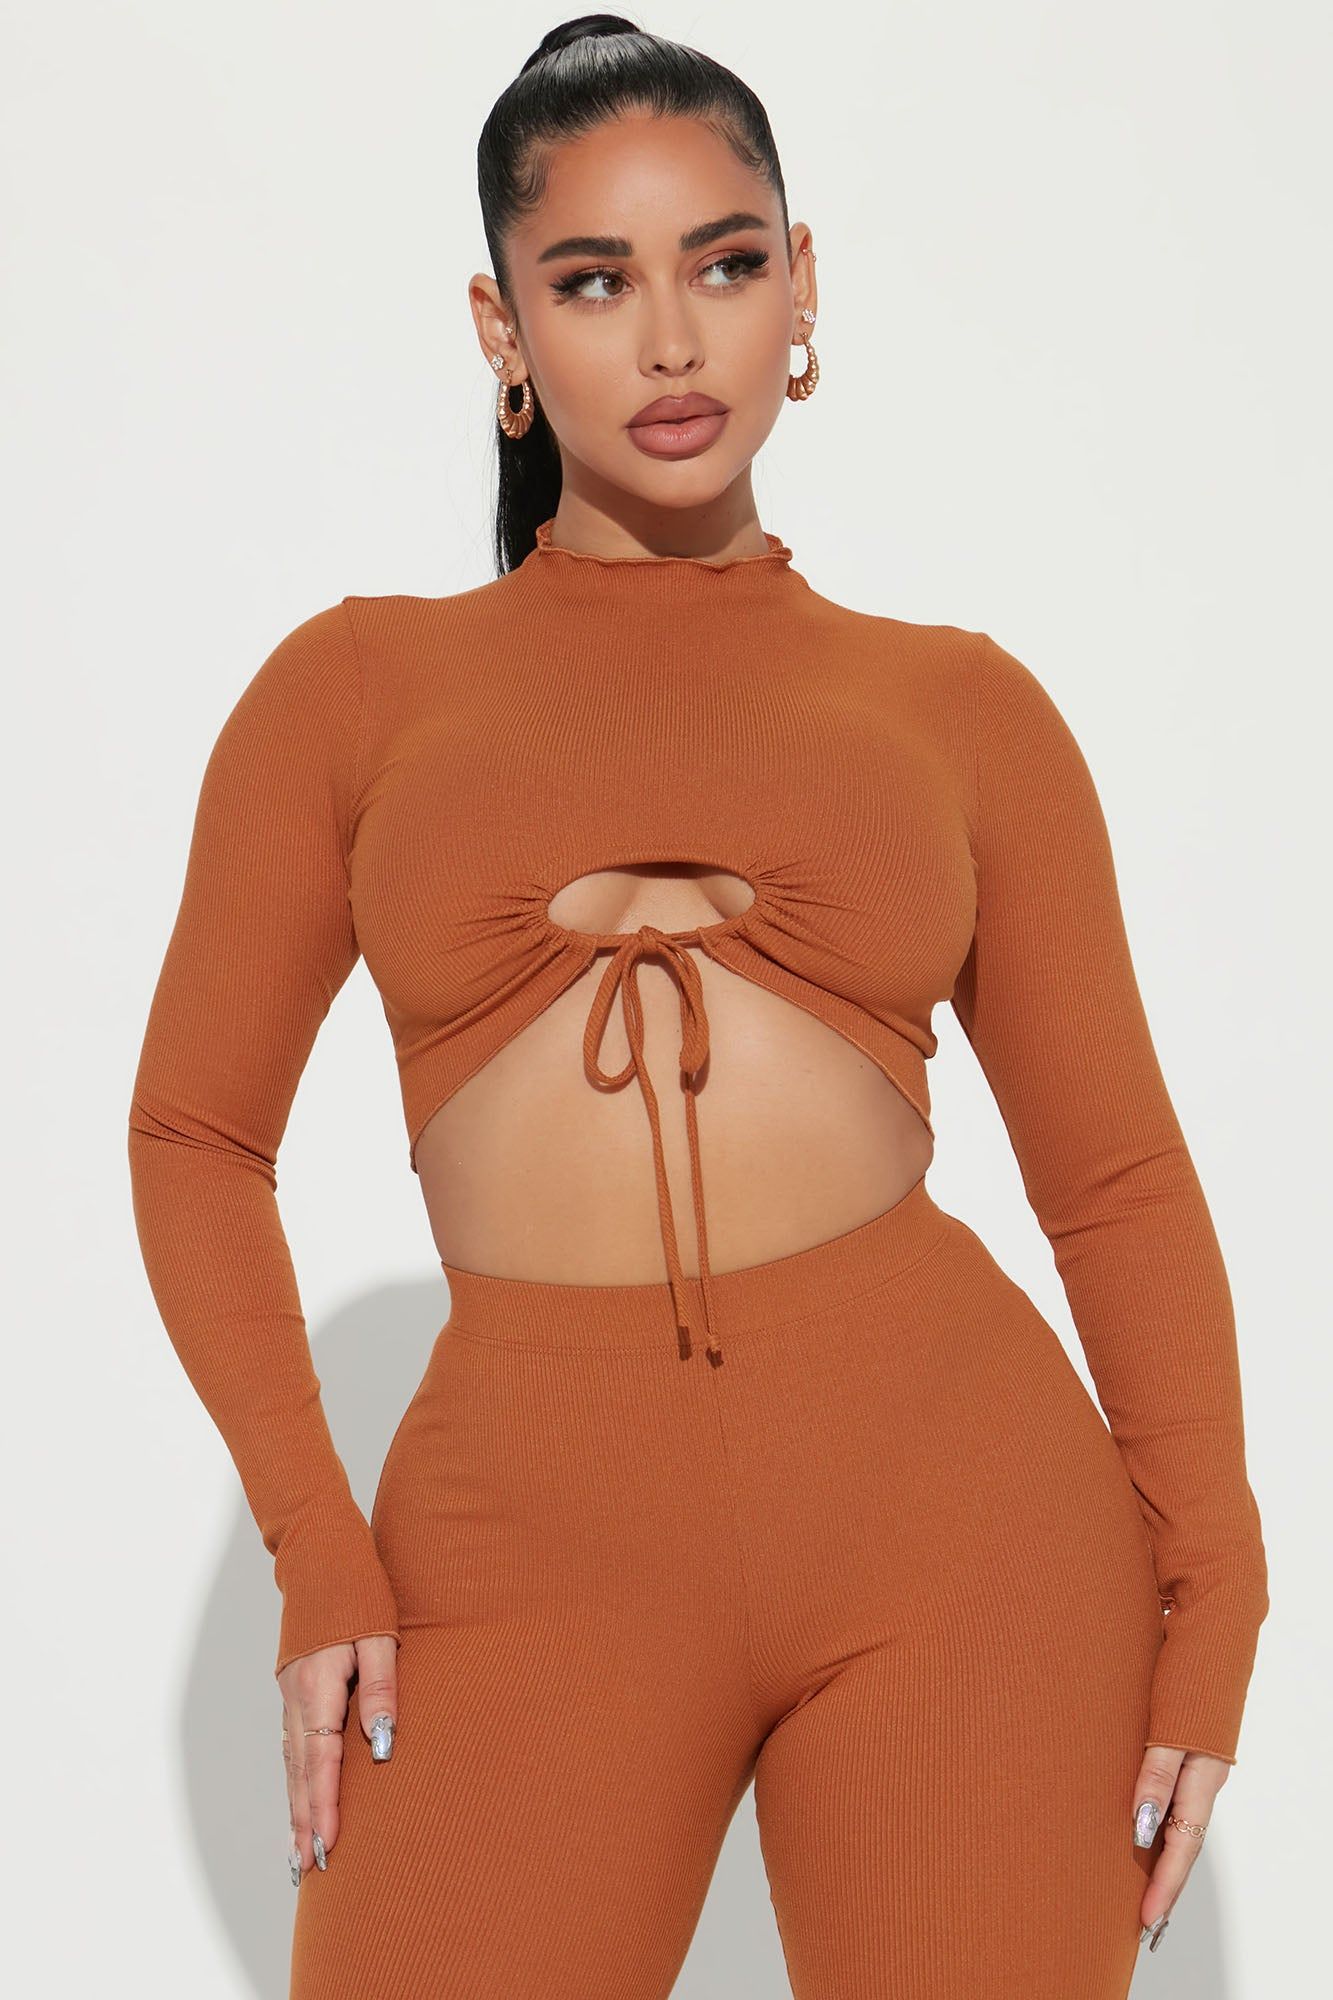 Women's Jessica Ribbed Pant Set in Camel Size Small by Fashion Nova